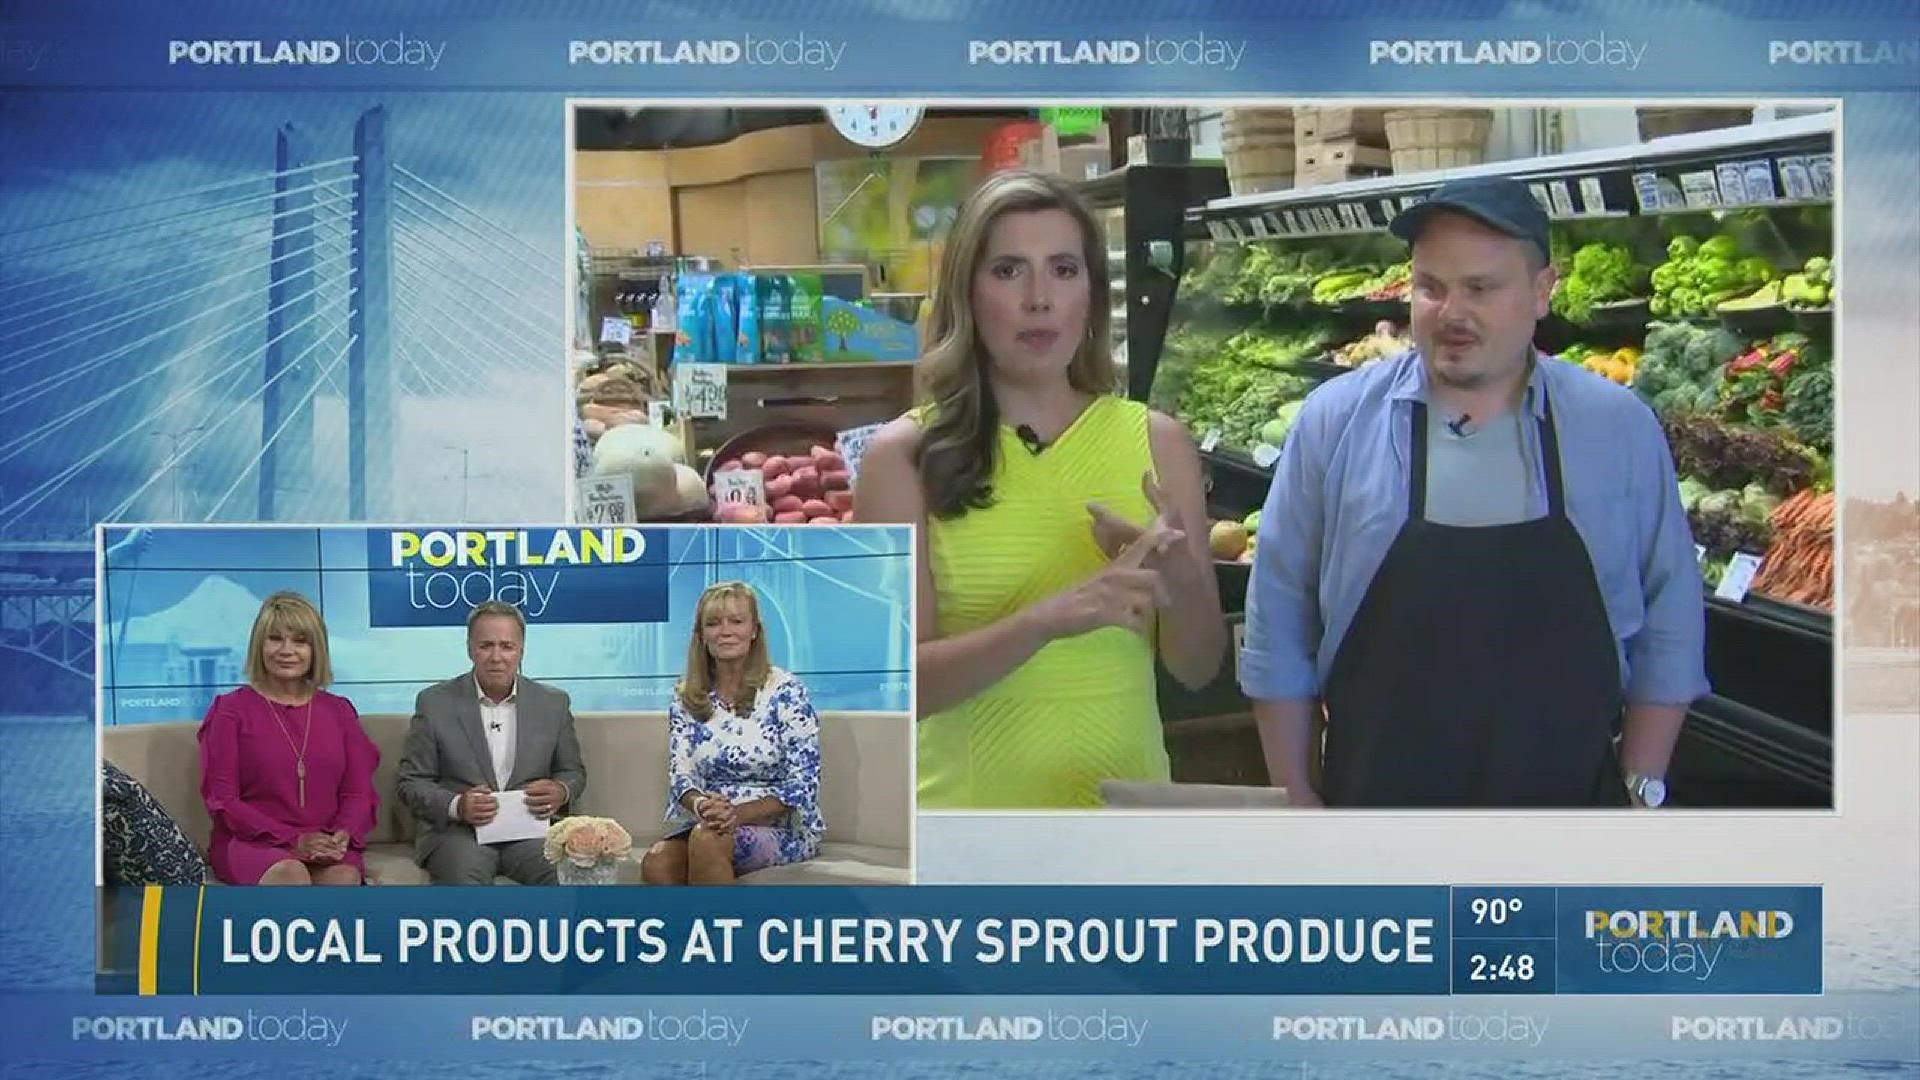 Local products at Cherry Sprout Produce